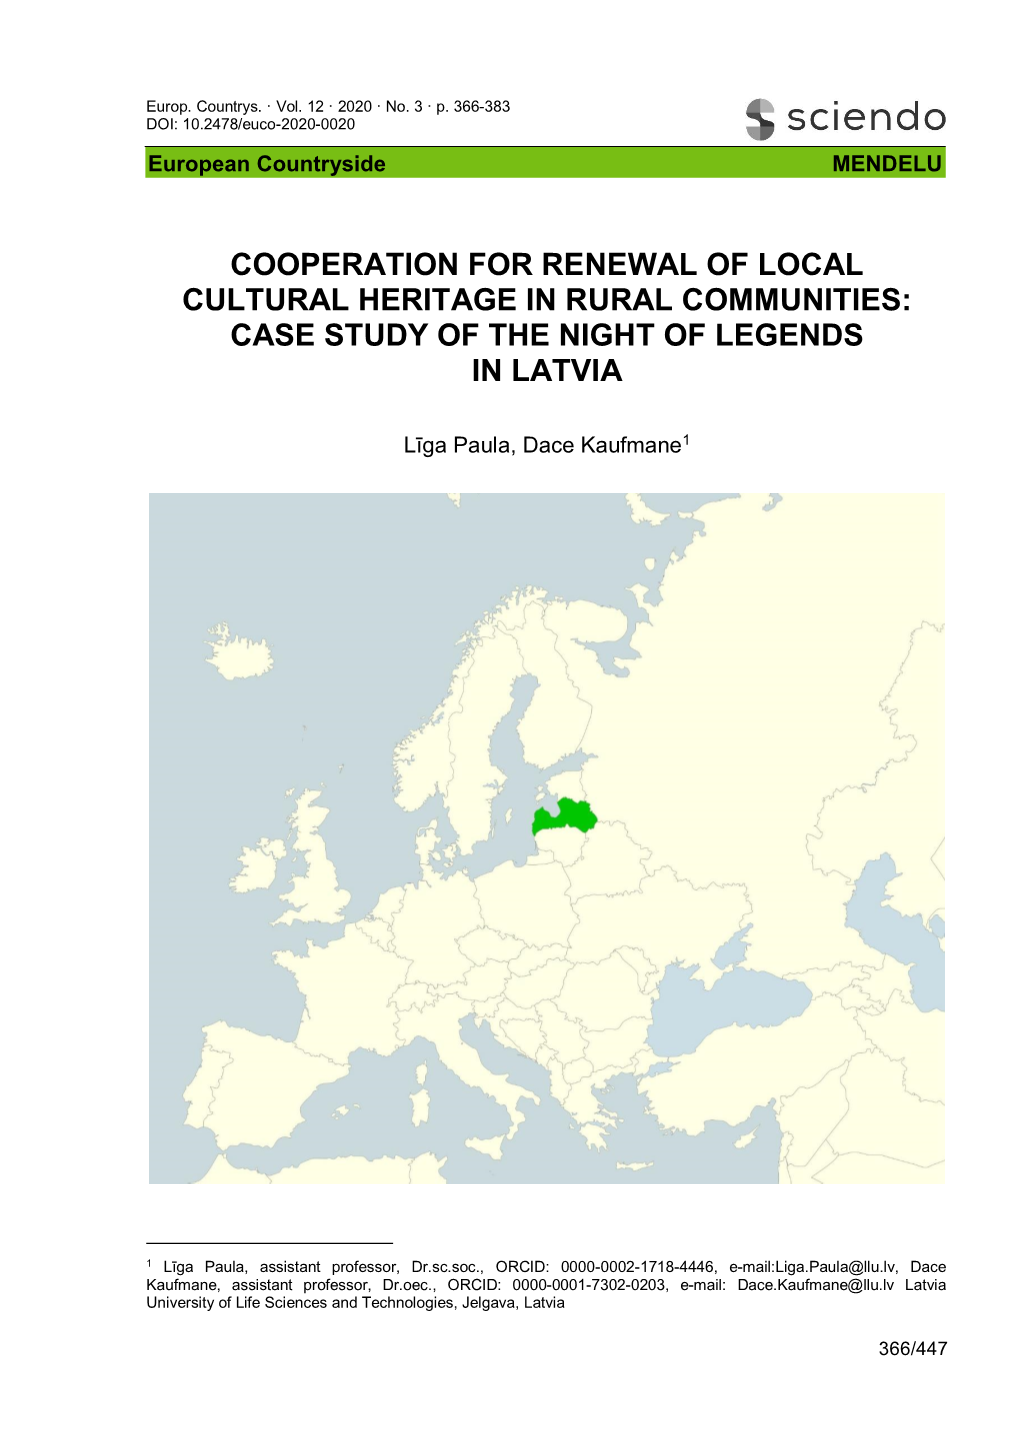 Cooperation for Renewal of Local Cultural Heritage in Rural Communities: Case Study of the Night of Legends in Latvia